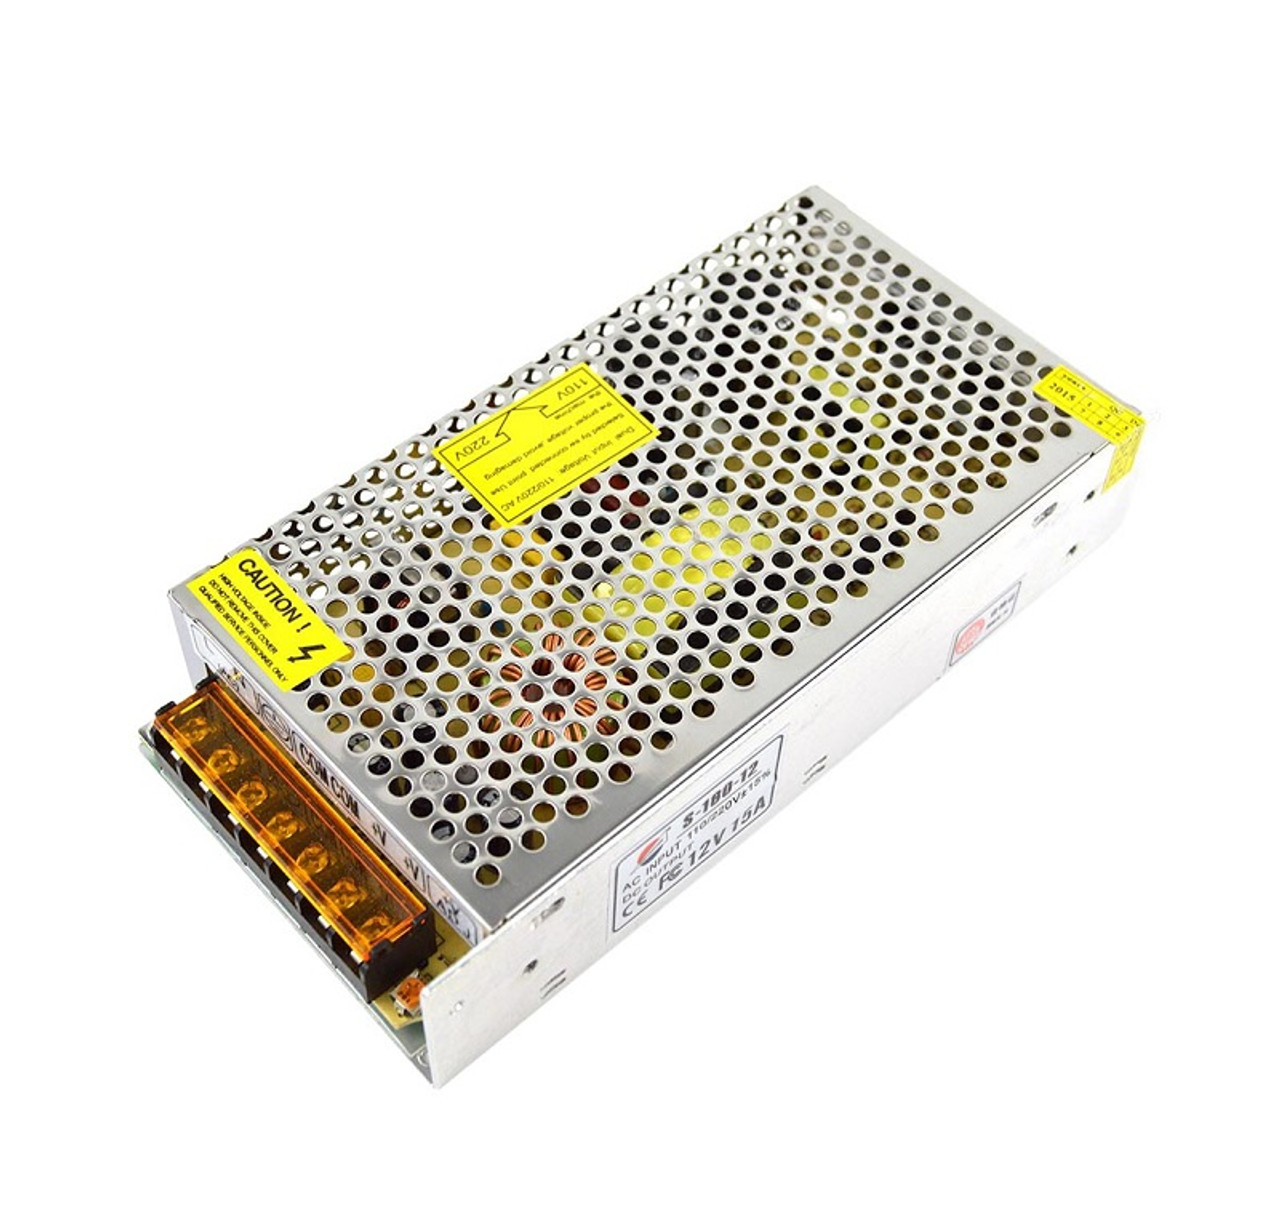 RM1-5764-000CN - HP LVPS Low Voltage Power Supply - 220V for Color LaserJet CP4025 / CP4525 Series